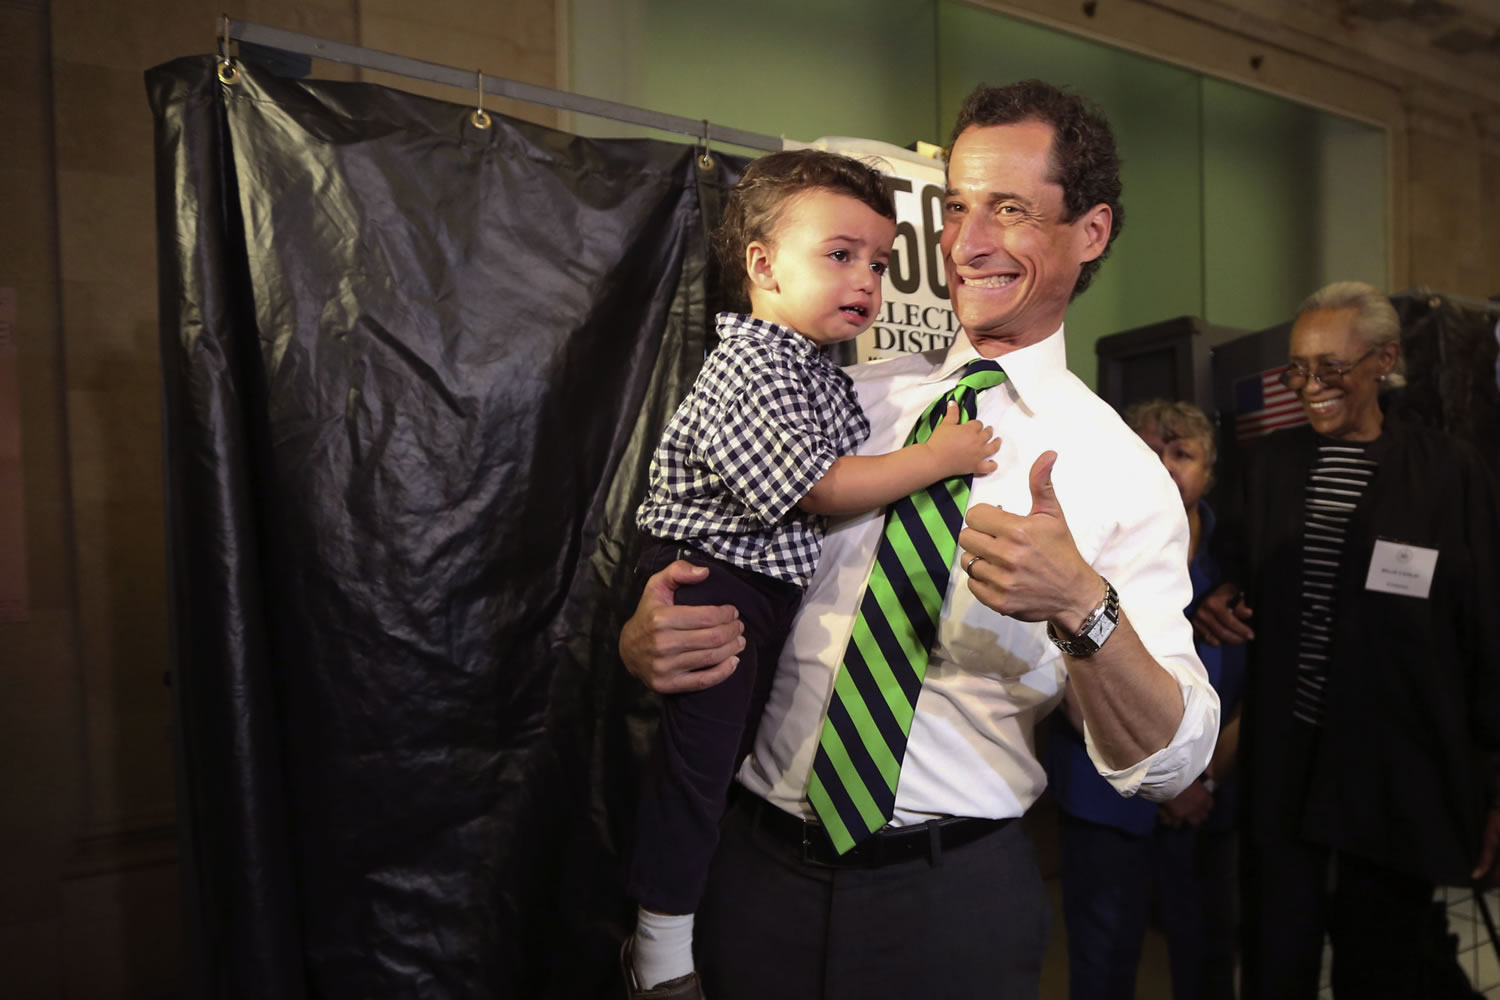 Democratic mayoral hopeful Anthony Weiner holds his son, Jordan, as he leaves the voting booth after casting his vote at his polling station during the primary election in New York on Tuesday.